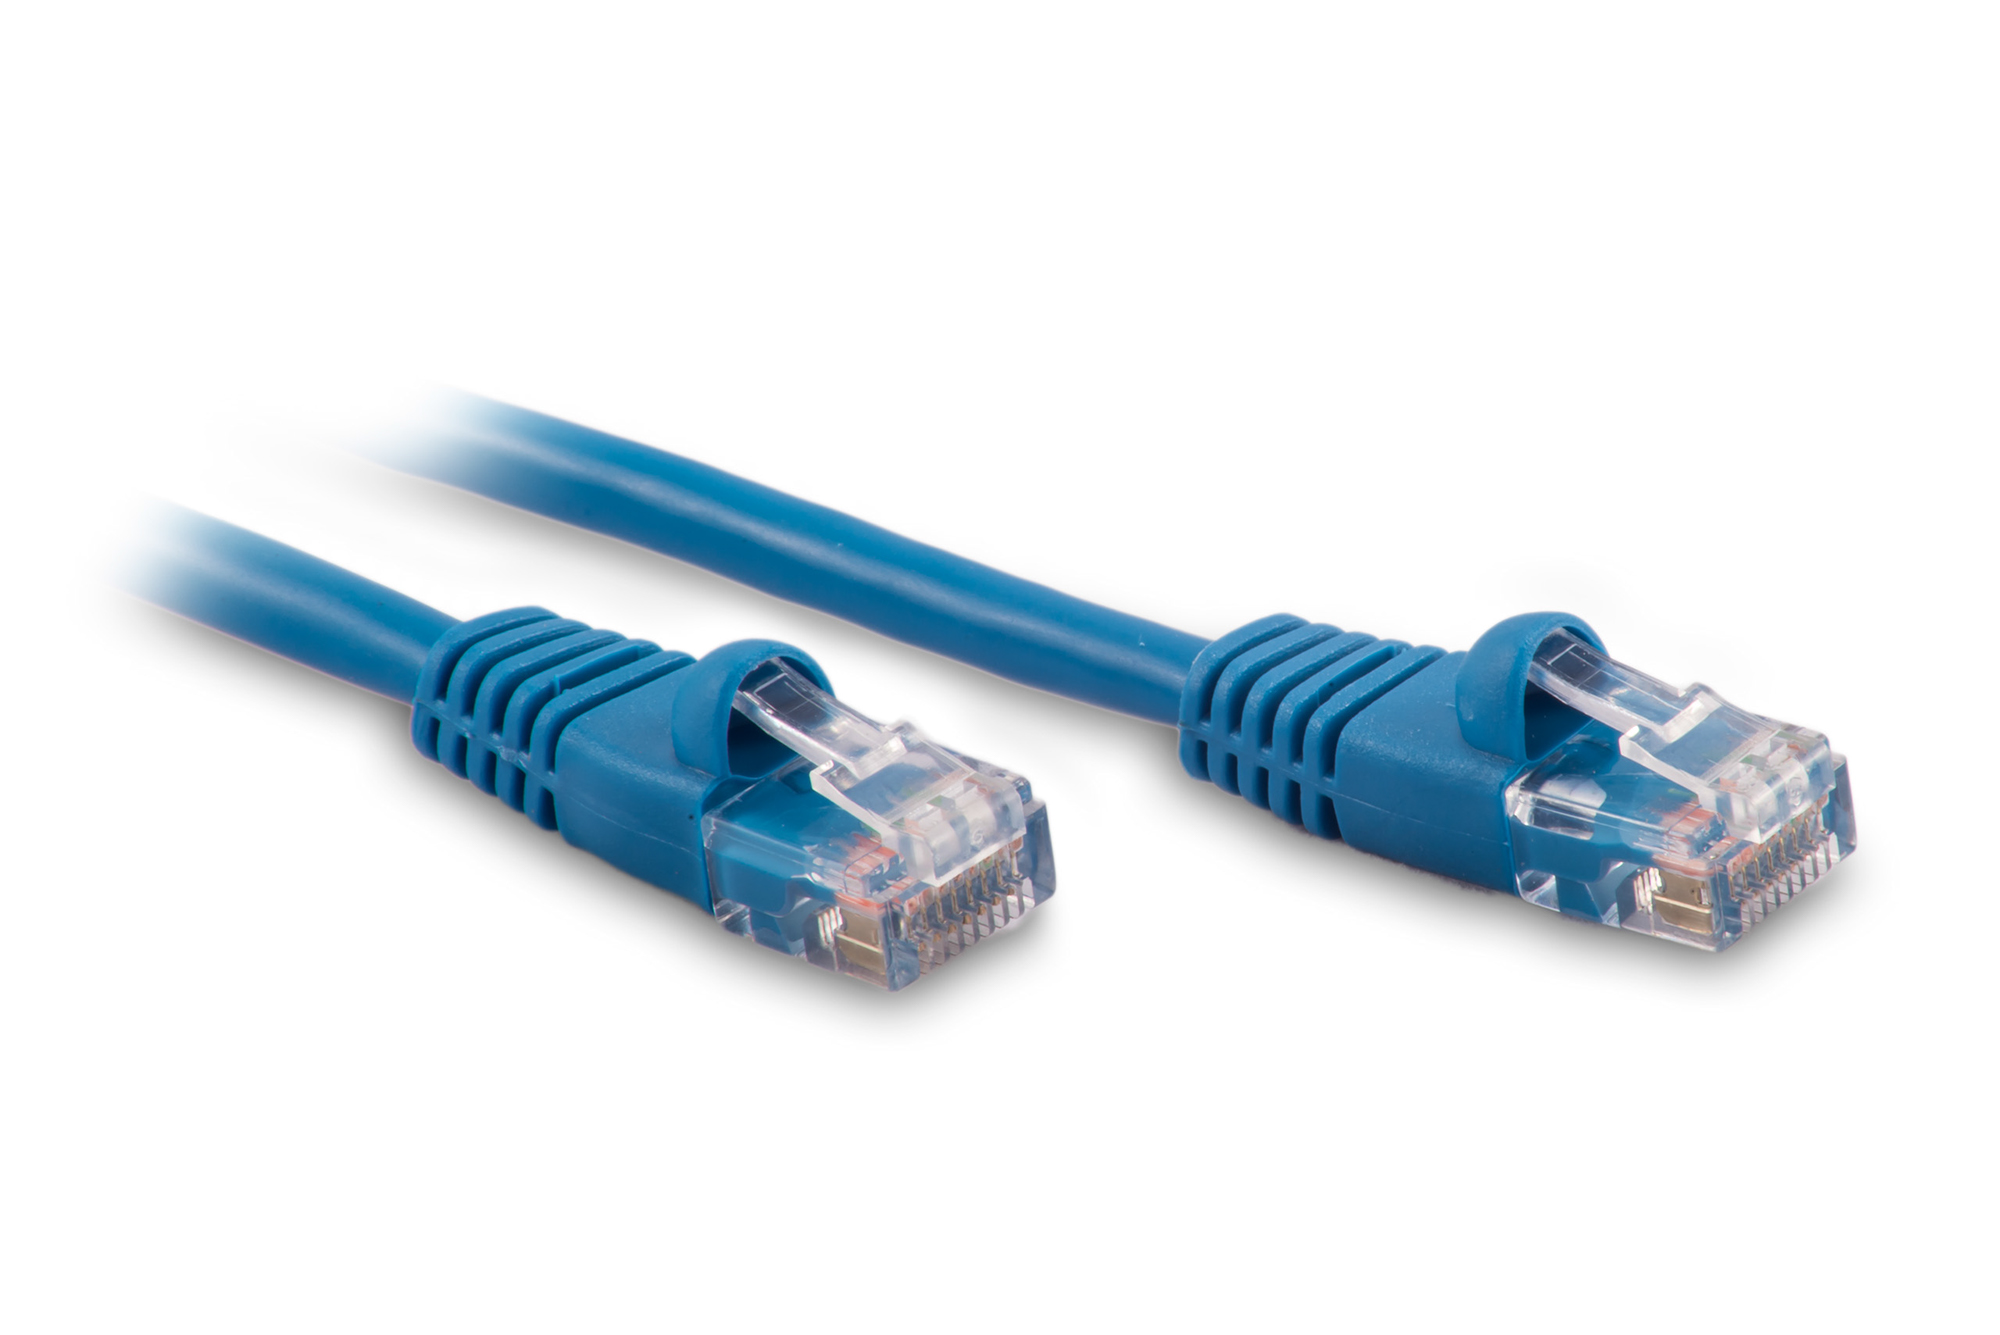 25ft Cat5e Ethernet Patch Cable - Blue Color - Snagless Boot, Stranded, RJ45, 350Mhz, 24AWG